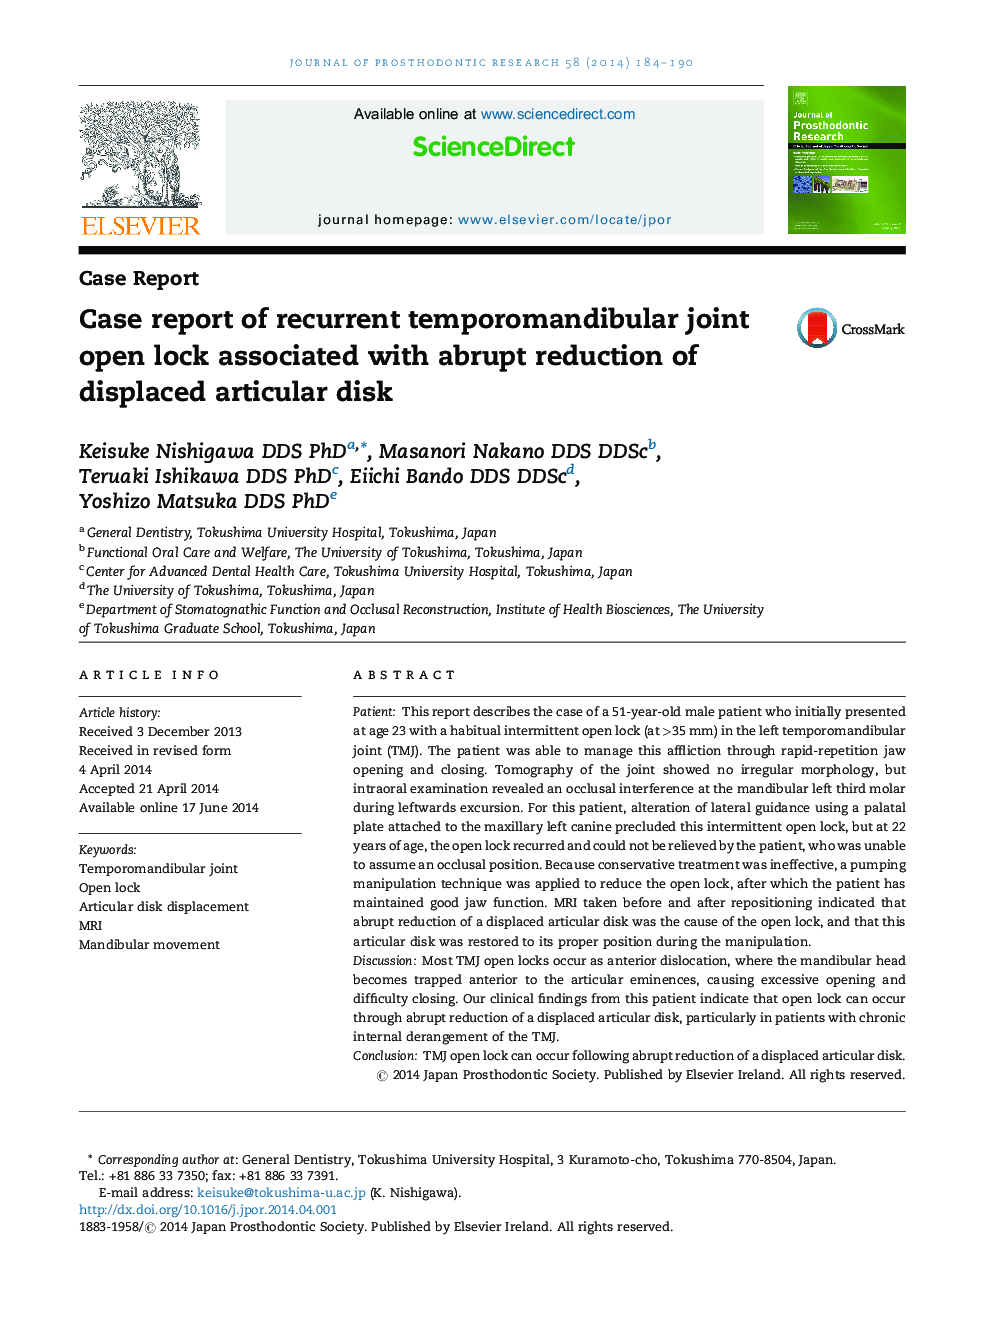 Case report of recurrent temporomandibular joint open lock associated with abrupt reduction of displaced articular disk